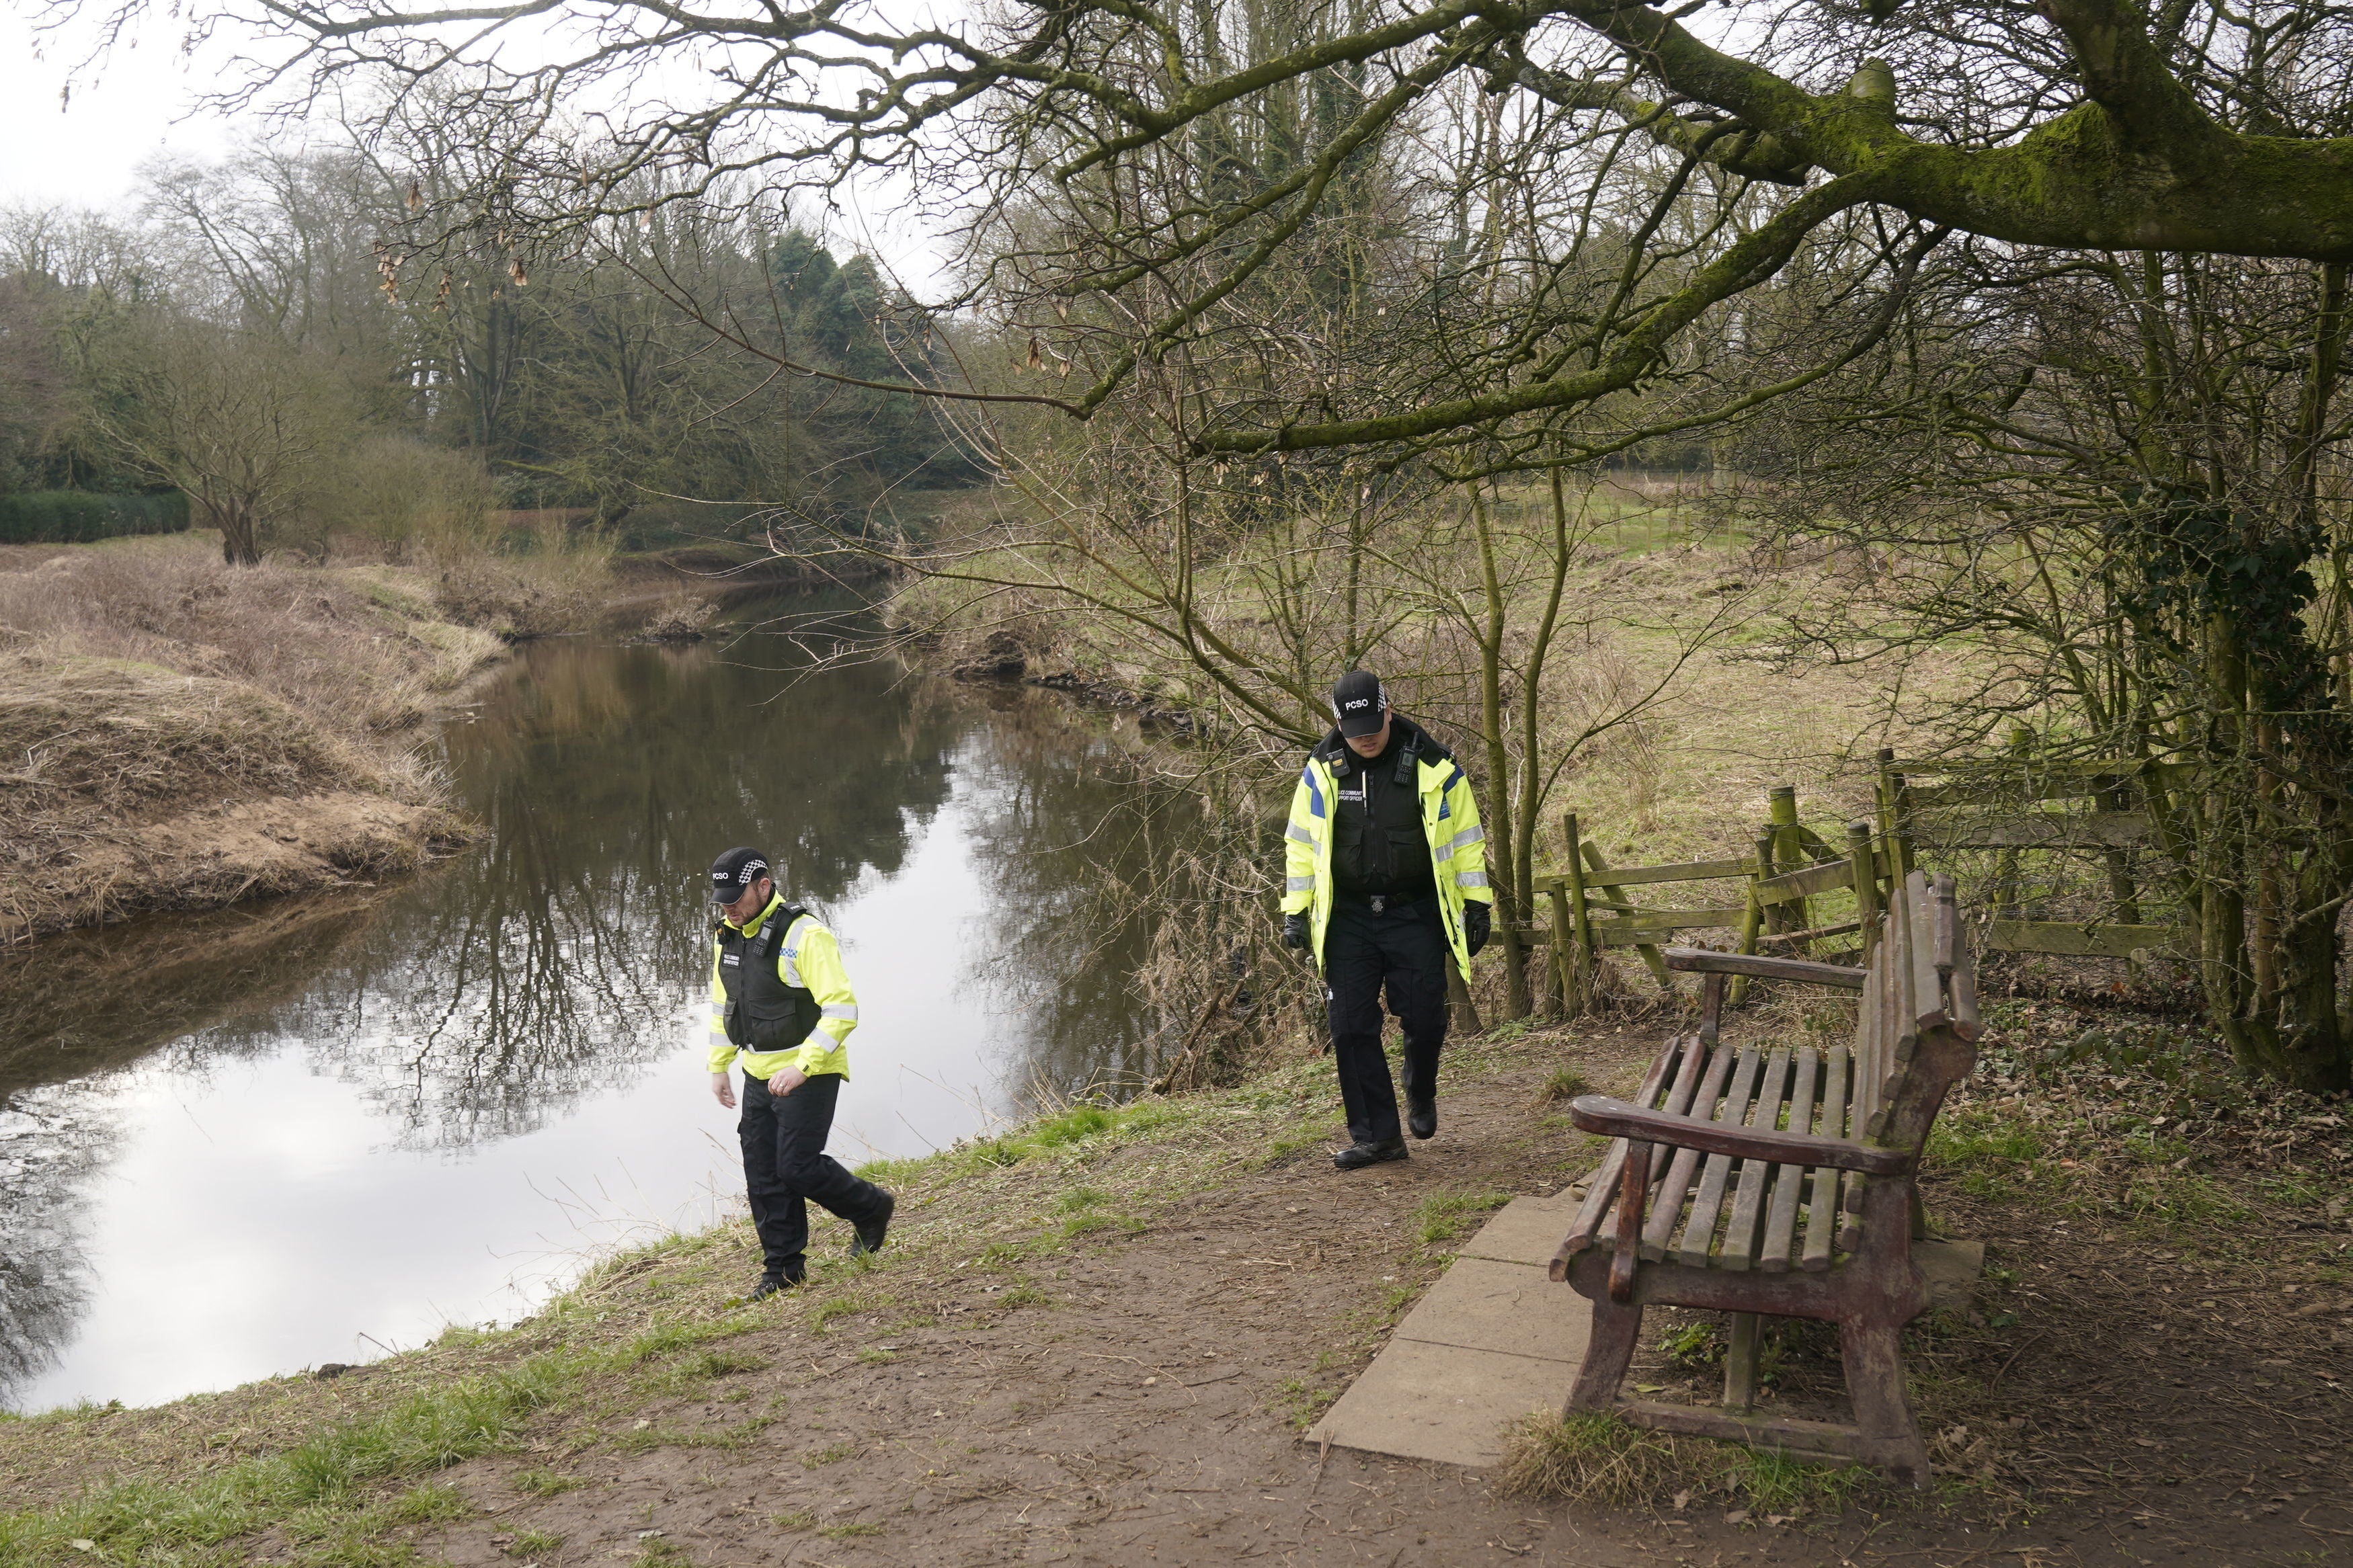 Police activity near the bench by the River Wyre in St Michael’s on Wyre, Lancashire, where Ms Bulley’s mobile phone was found